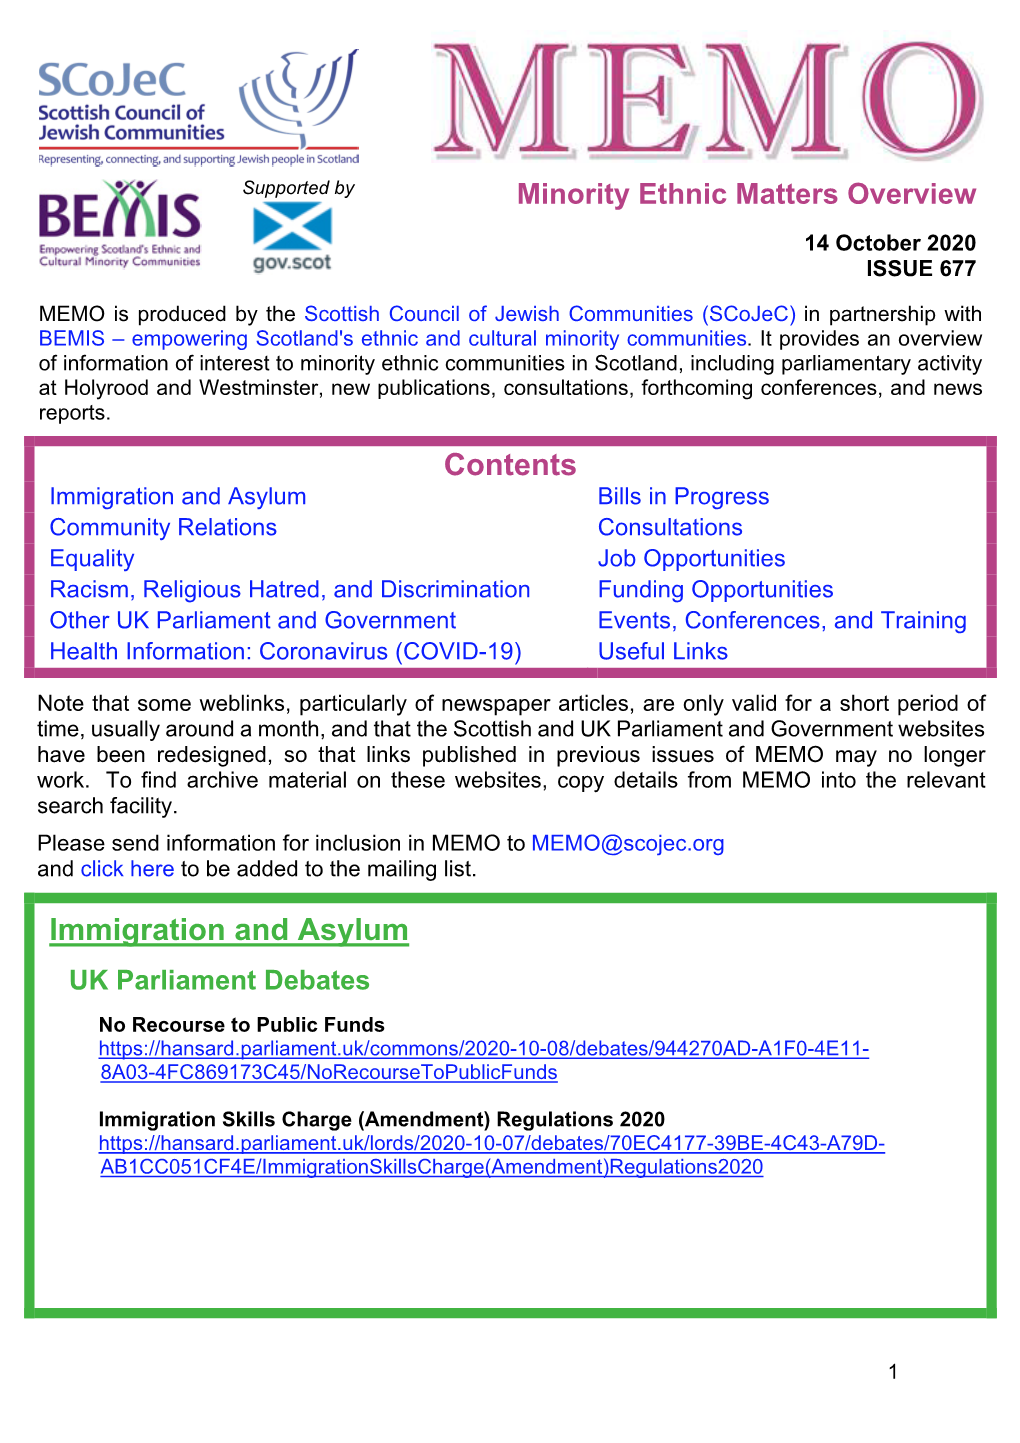 MEMO Is Produced by the Scottish Council of Jewish Communities (Scojec) in Partnership with BEMIS – Empowering Scotland's Ethnic and Cultural Minority Communities